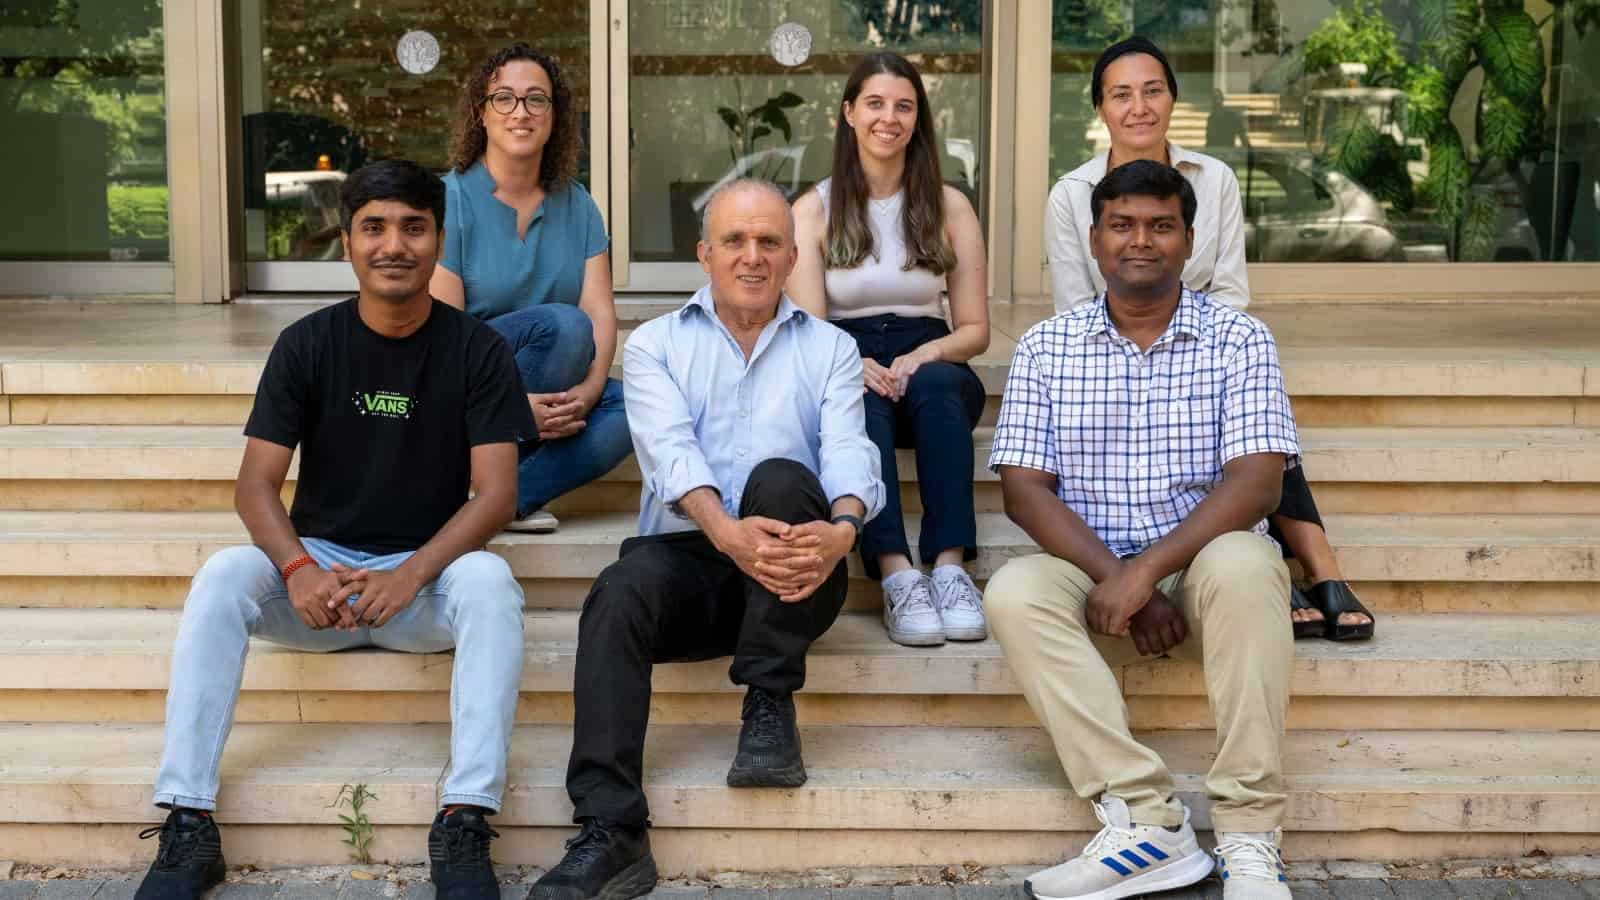 Researchers, from left back row, Dr. Roni Oren, Anna Rudnitsky and Dr. Mirie Zerbib; and front row, Nitin Gupta, Prof. Yosef Yarden and Dr. Suvendu Giri. Photo courtesy of Weizmann Institute